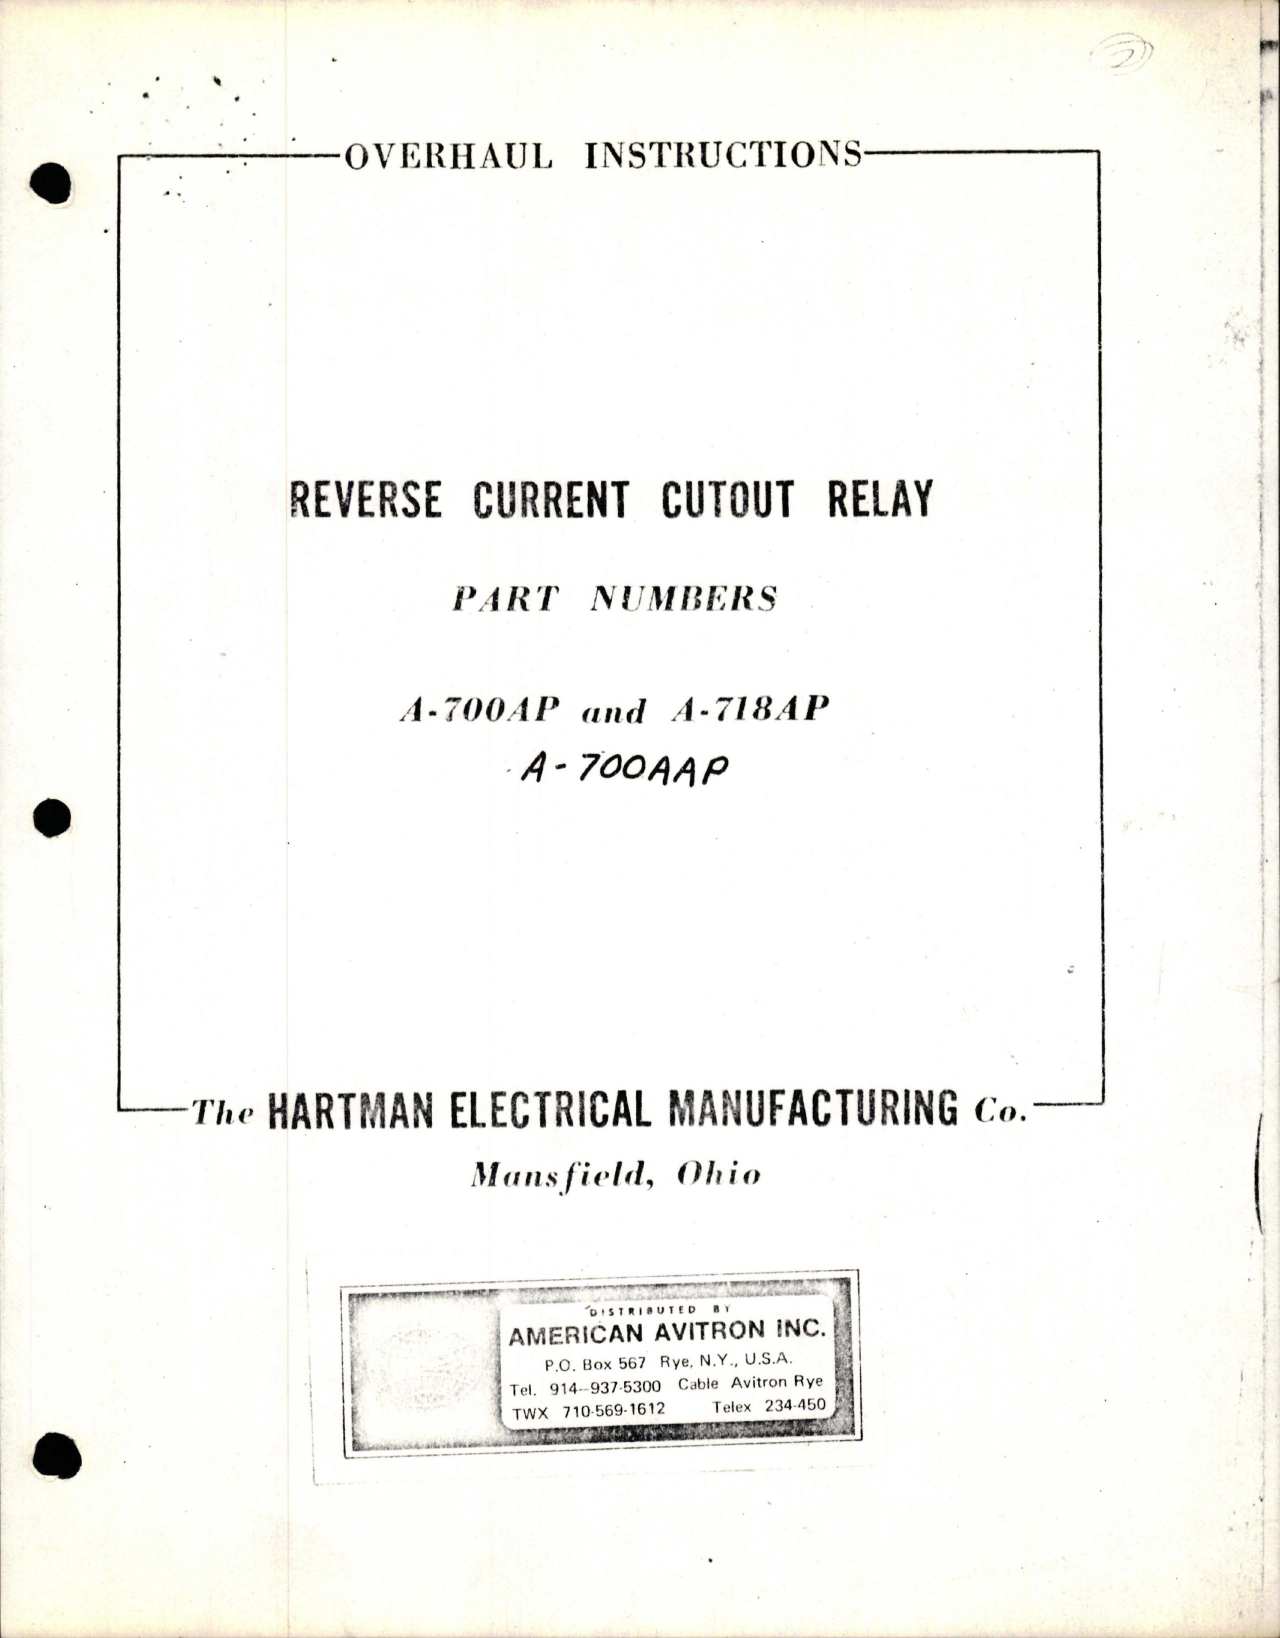 Sample page 1 from AirCorps Library document: Overhaul Instructions for Reverse Current Cutout Relay - Parts A-700AP and A-718AP